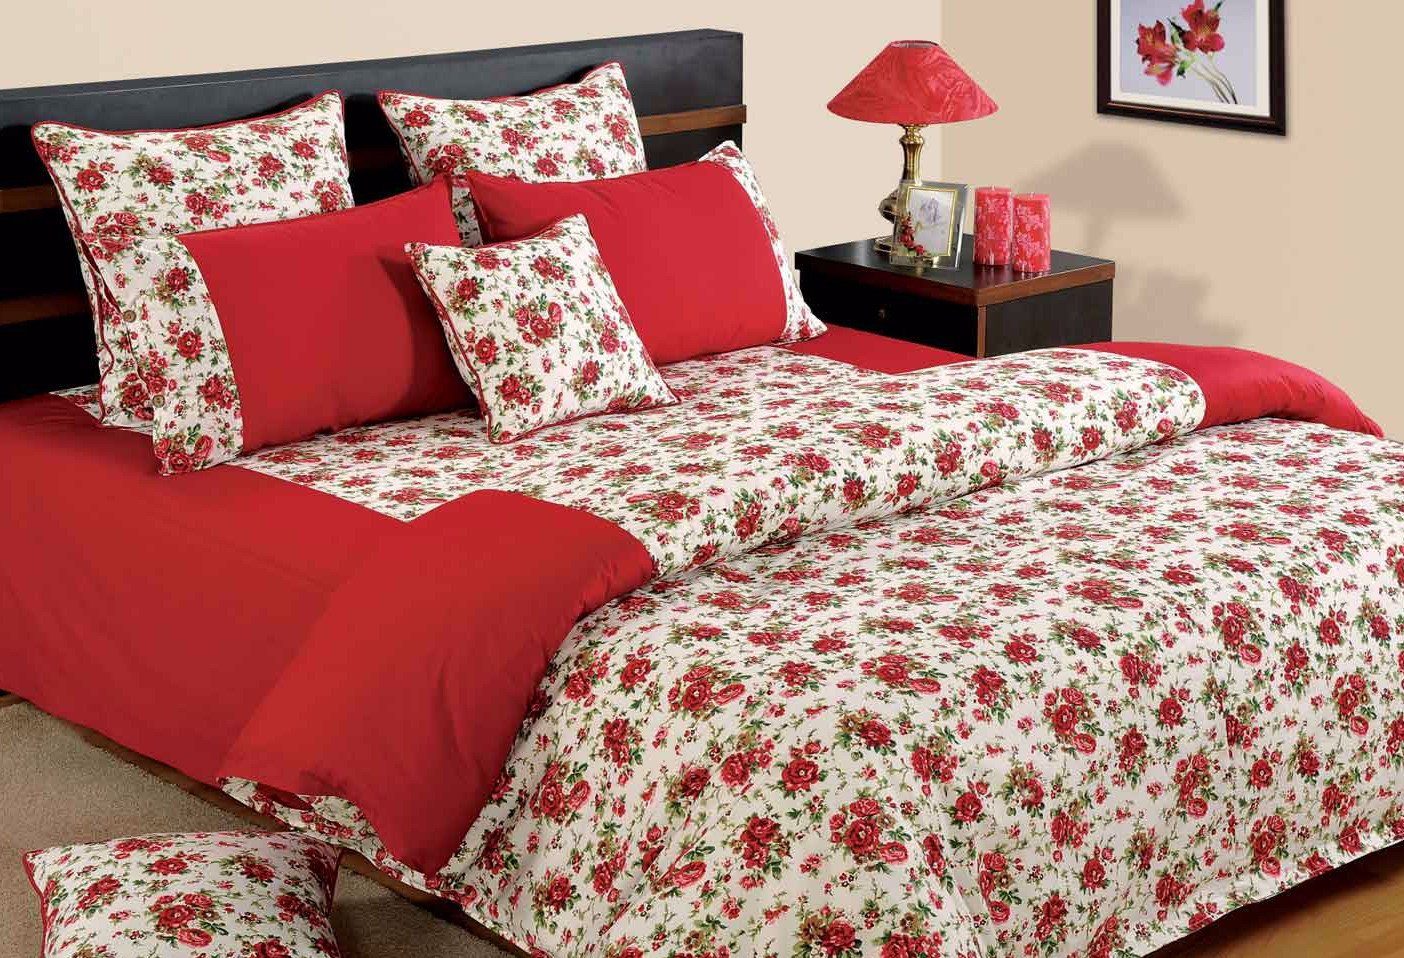 Canopus Red Roses Duvet Covers set - Flickdeal.co.nz